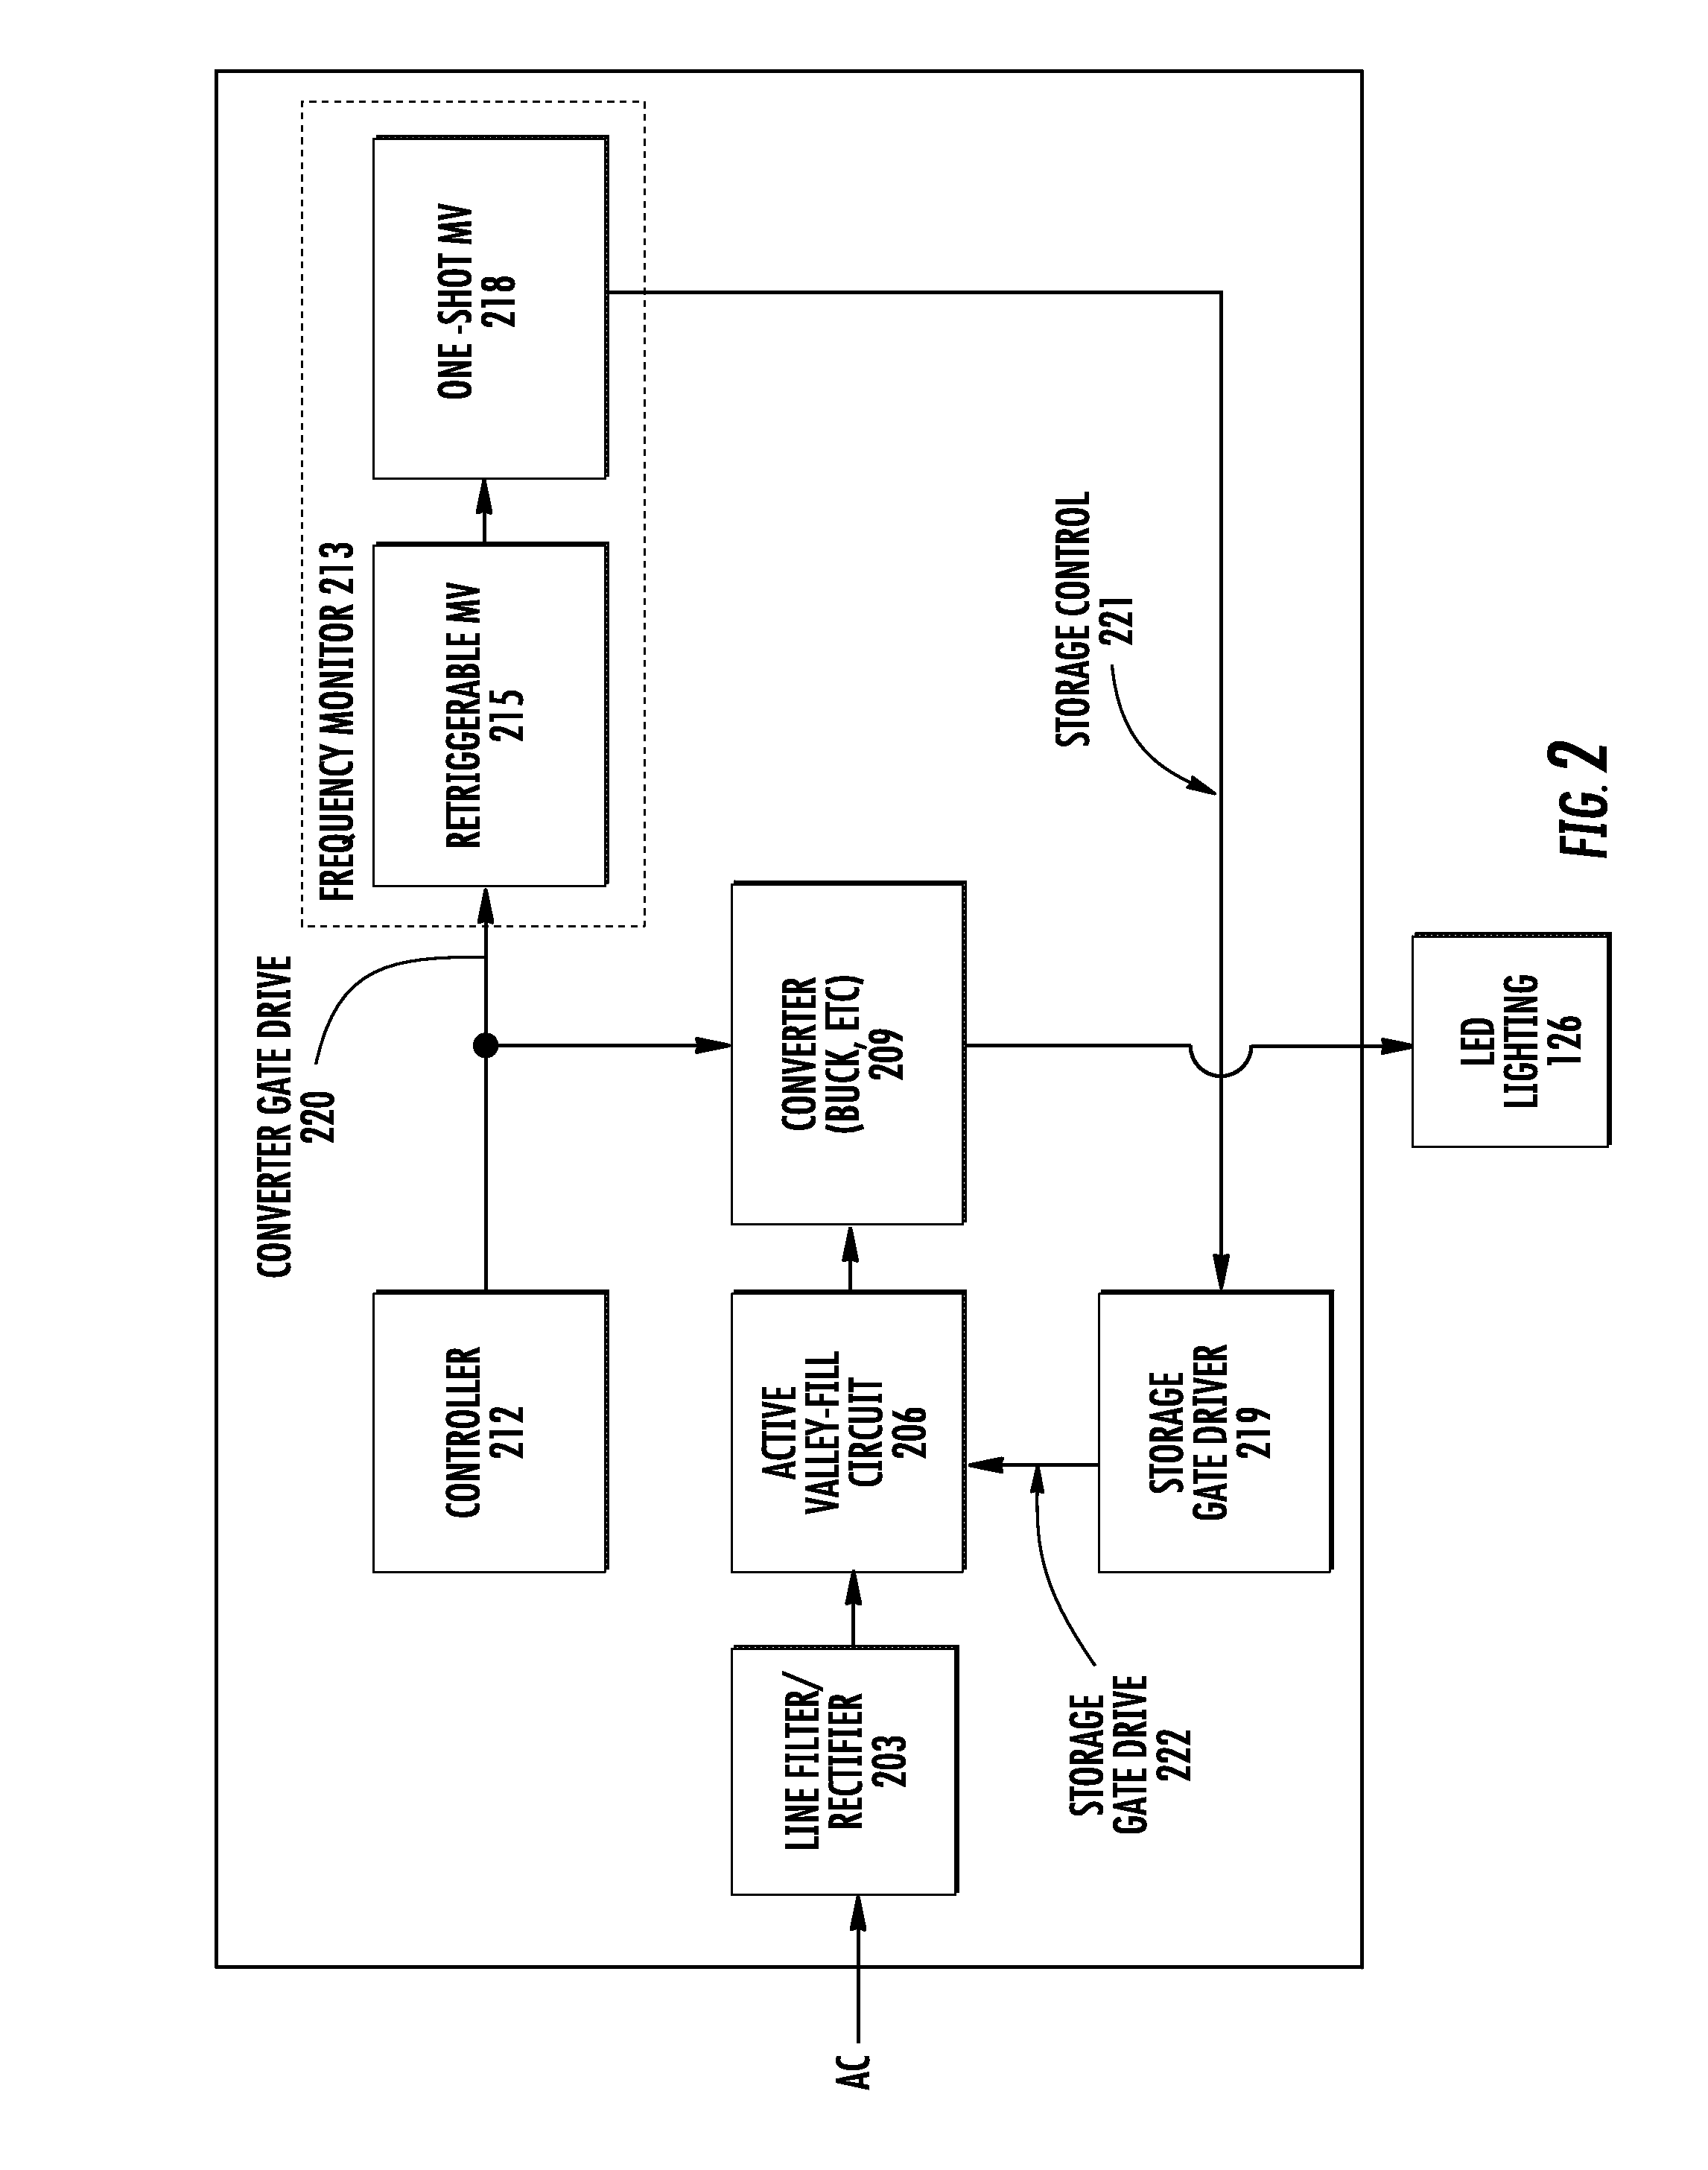 Valley-Fill Power Factor Correction Circuit with Active Conduction Angle Control